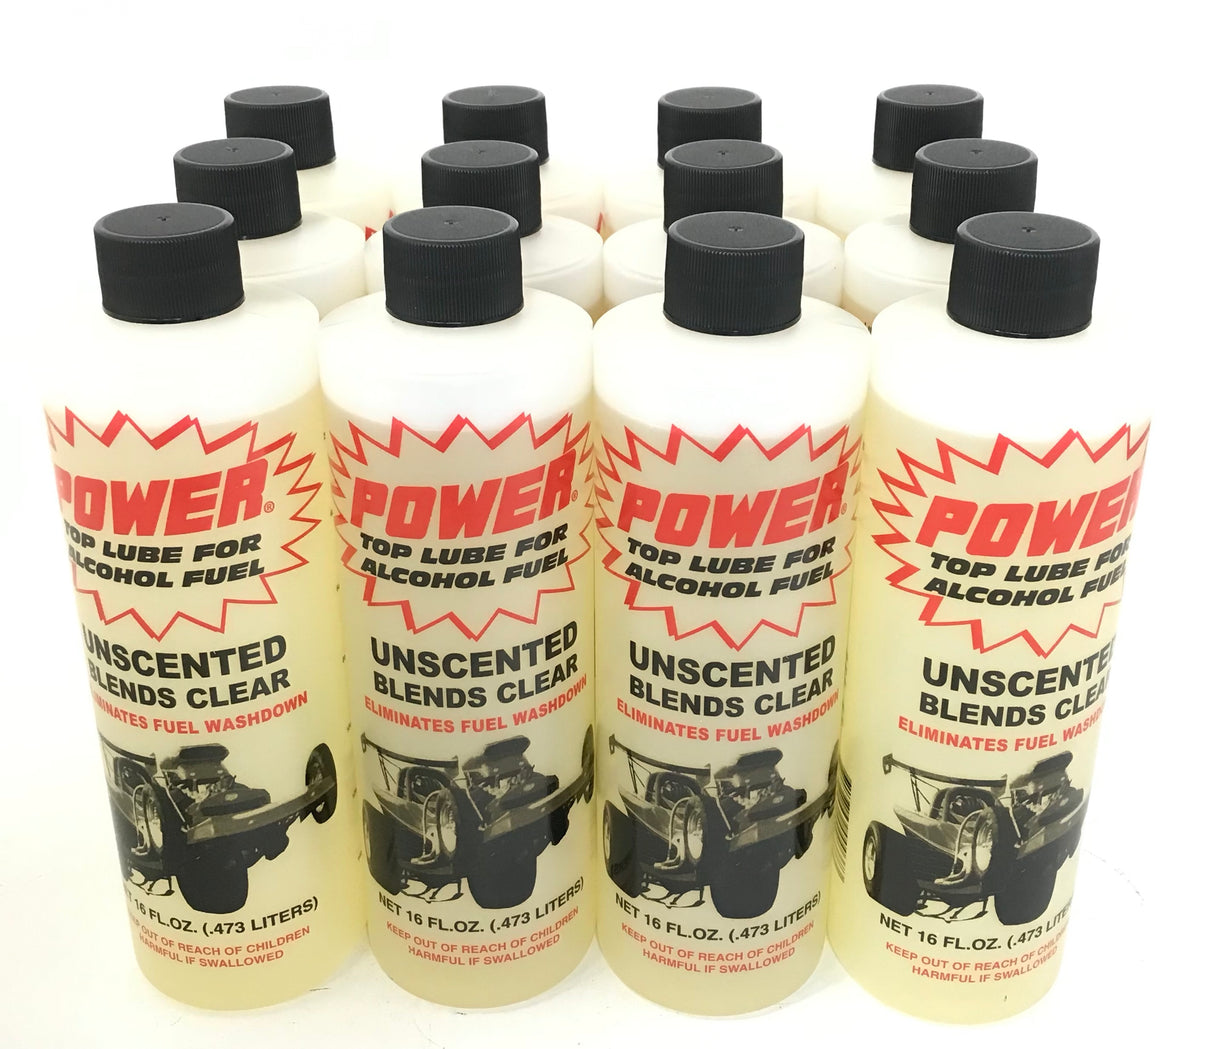 PowerPlus Lubricants Alcohol Top Lube Unscented 16oz-Liquid Power Upper Cylinder Lube - 12 PACK